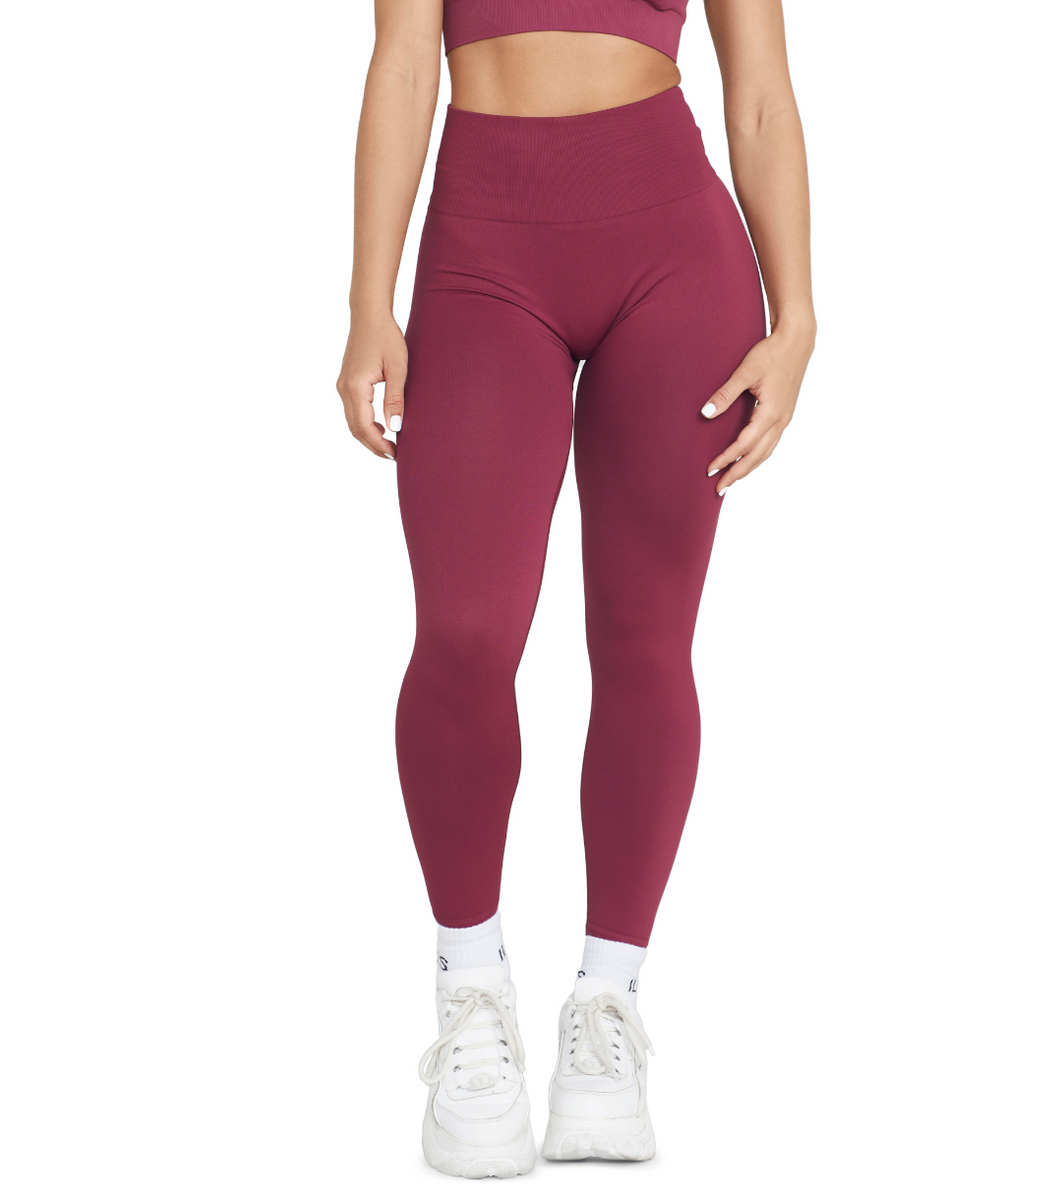 Spanx Assets Heather Maroon Seamless Leggings Red Size XL - $20 - From  Alison